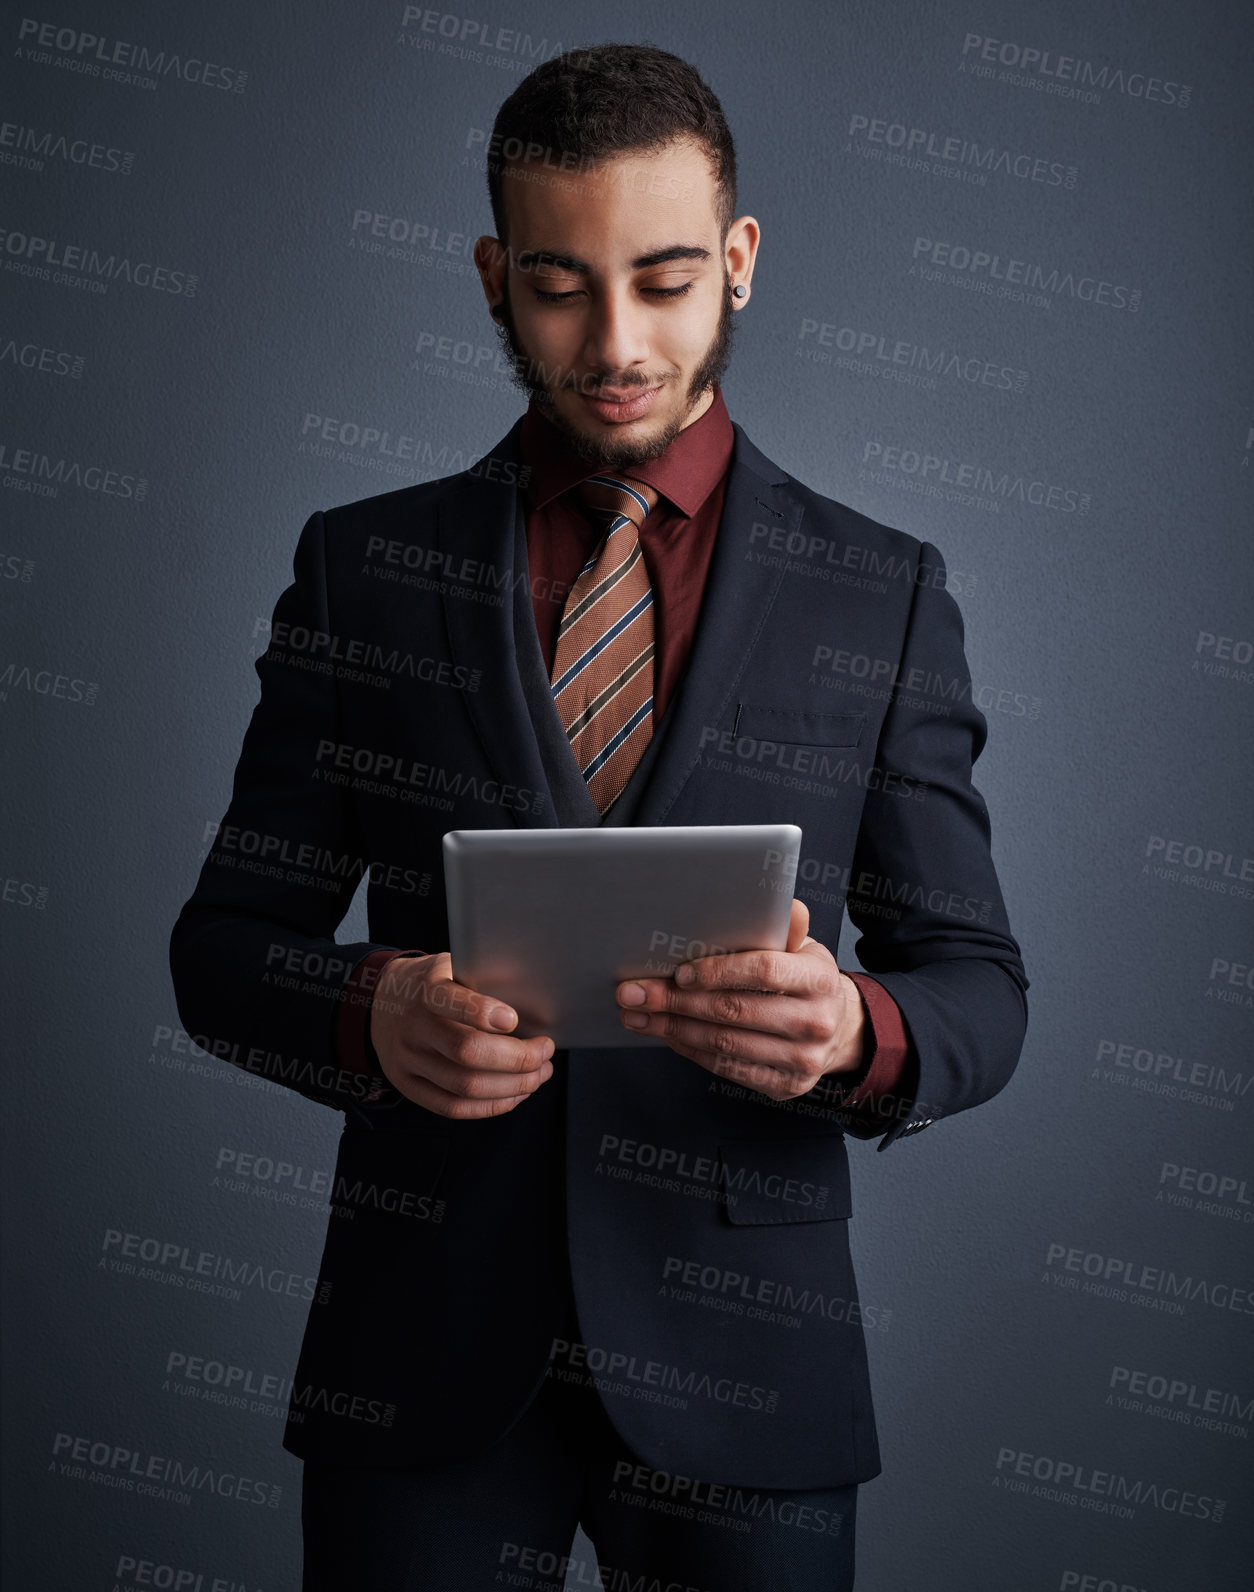 Buy stock photo Studio shot of a stylish young businessman using a tablet against a gray background